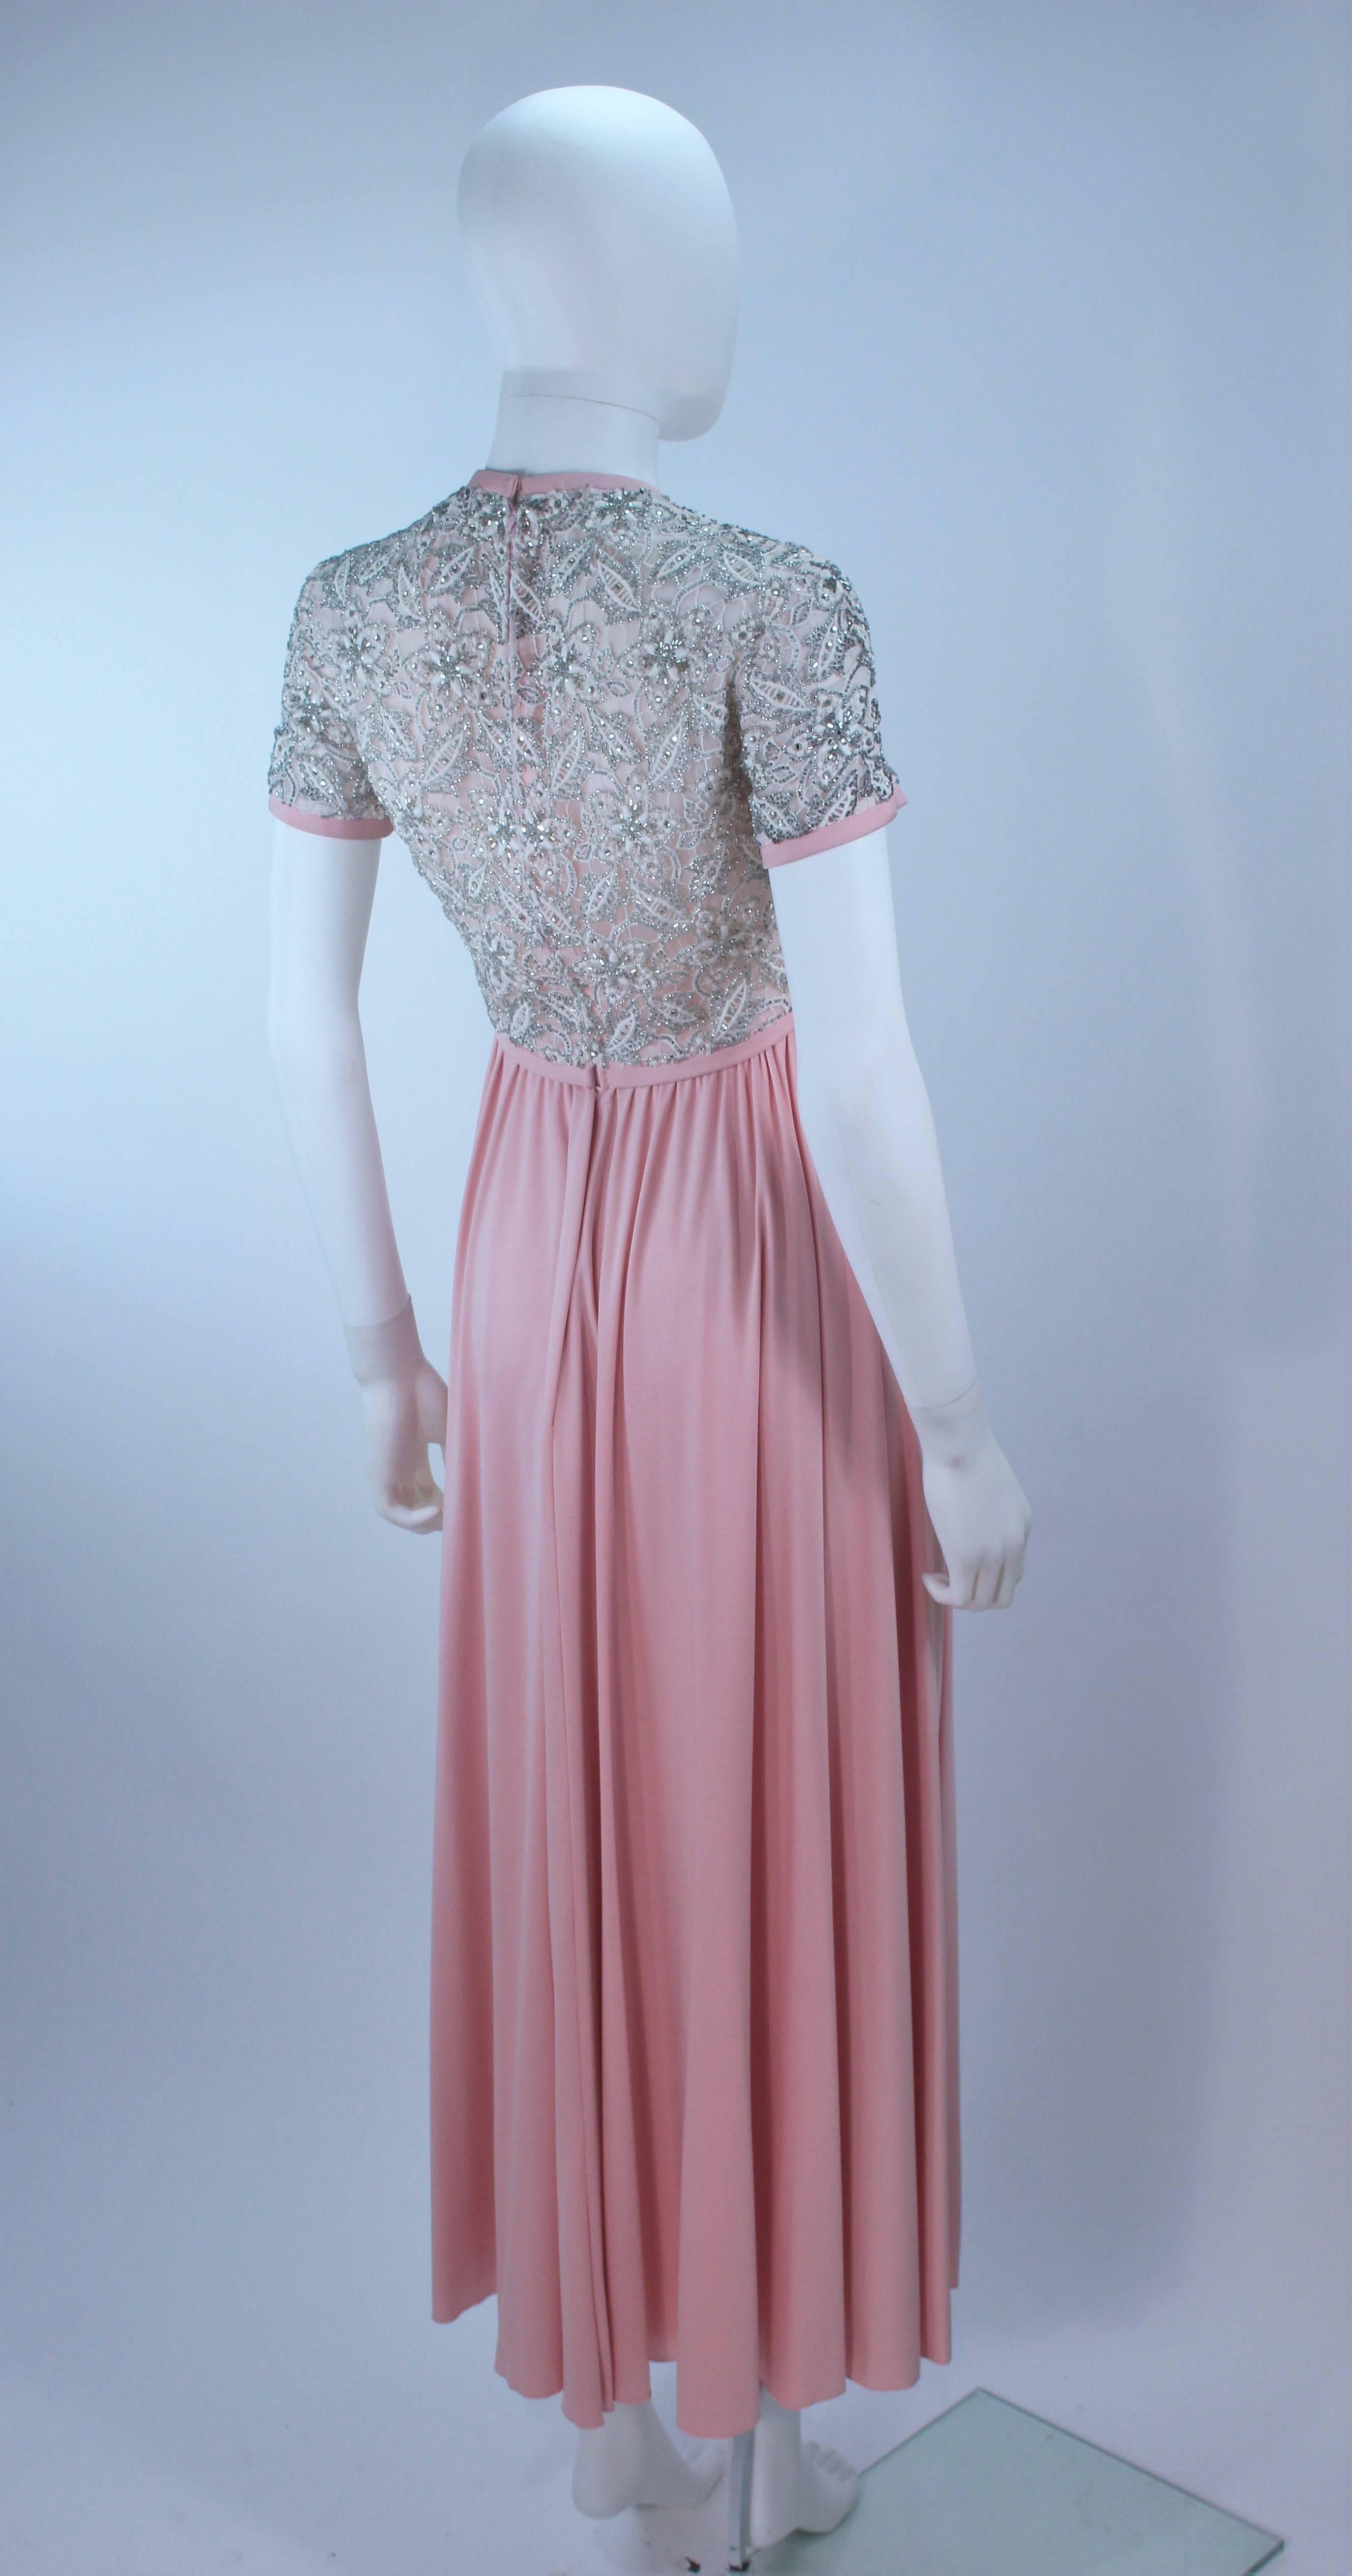 VICTORIA ROYAL Pink Gown with Beaded Bodice and Jersey Skirt Size 2 4 For Sale 1